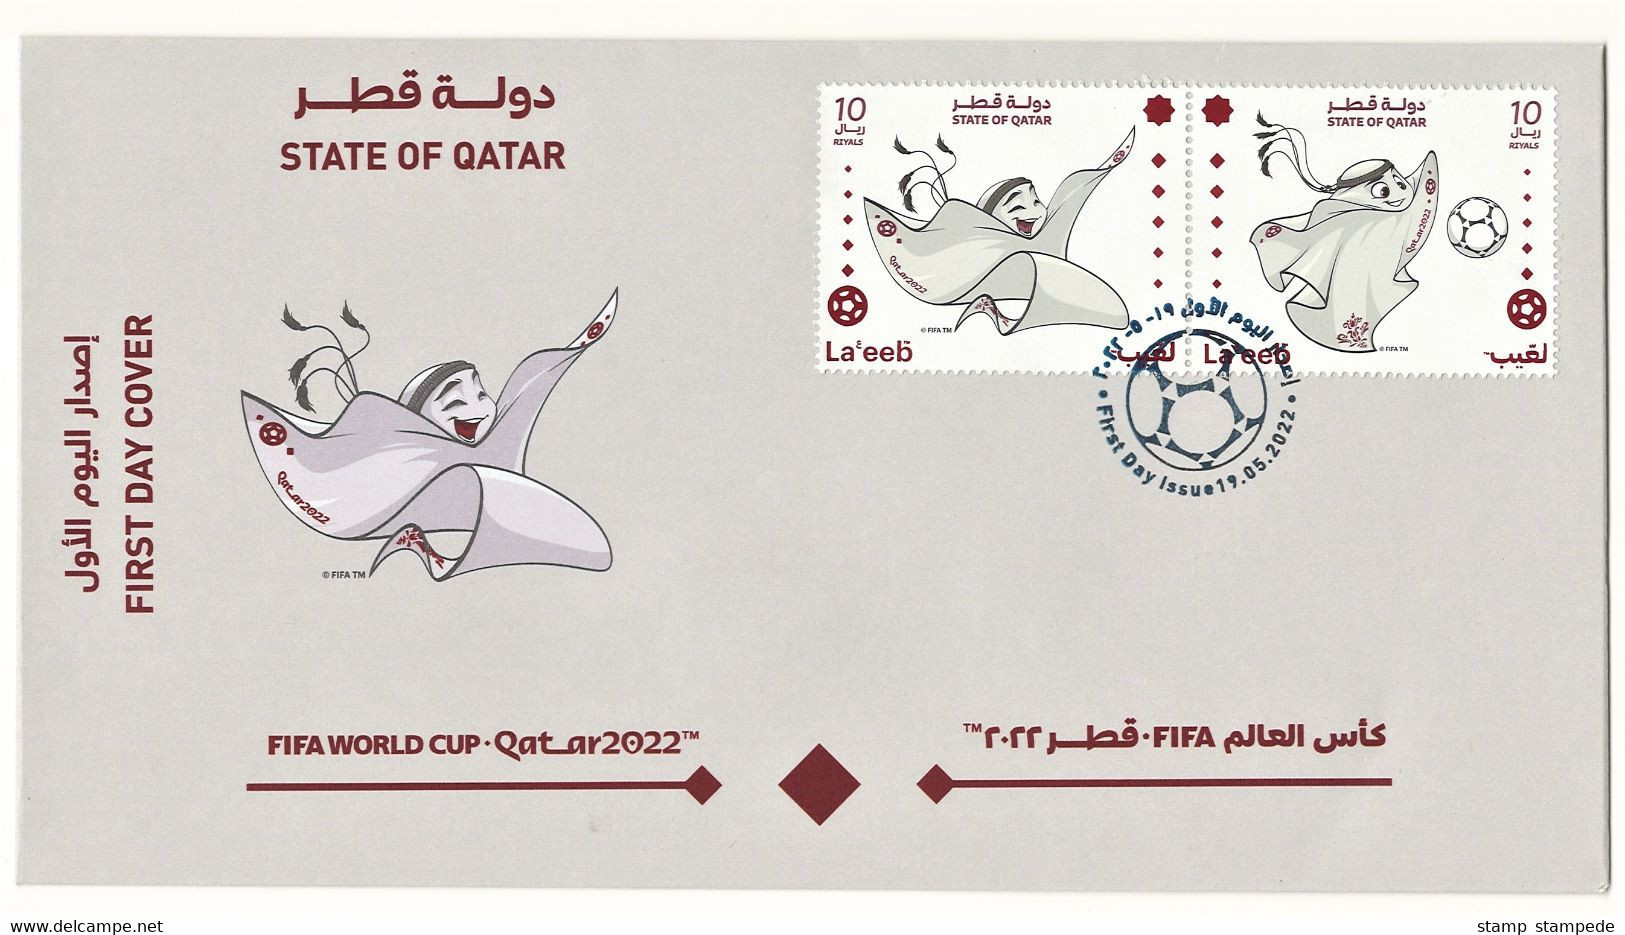 Laeeb - Official Mascot Of 2022 FIFA World Cup In Qatar - First Day Cover FDC - Soccer Football - 2022 – Qatar